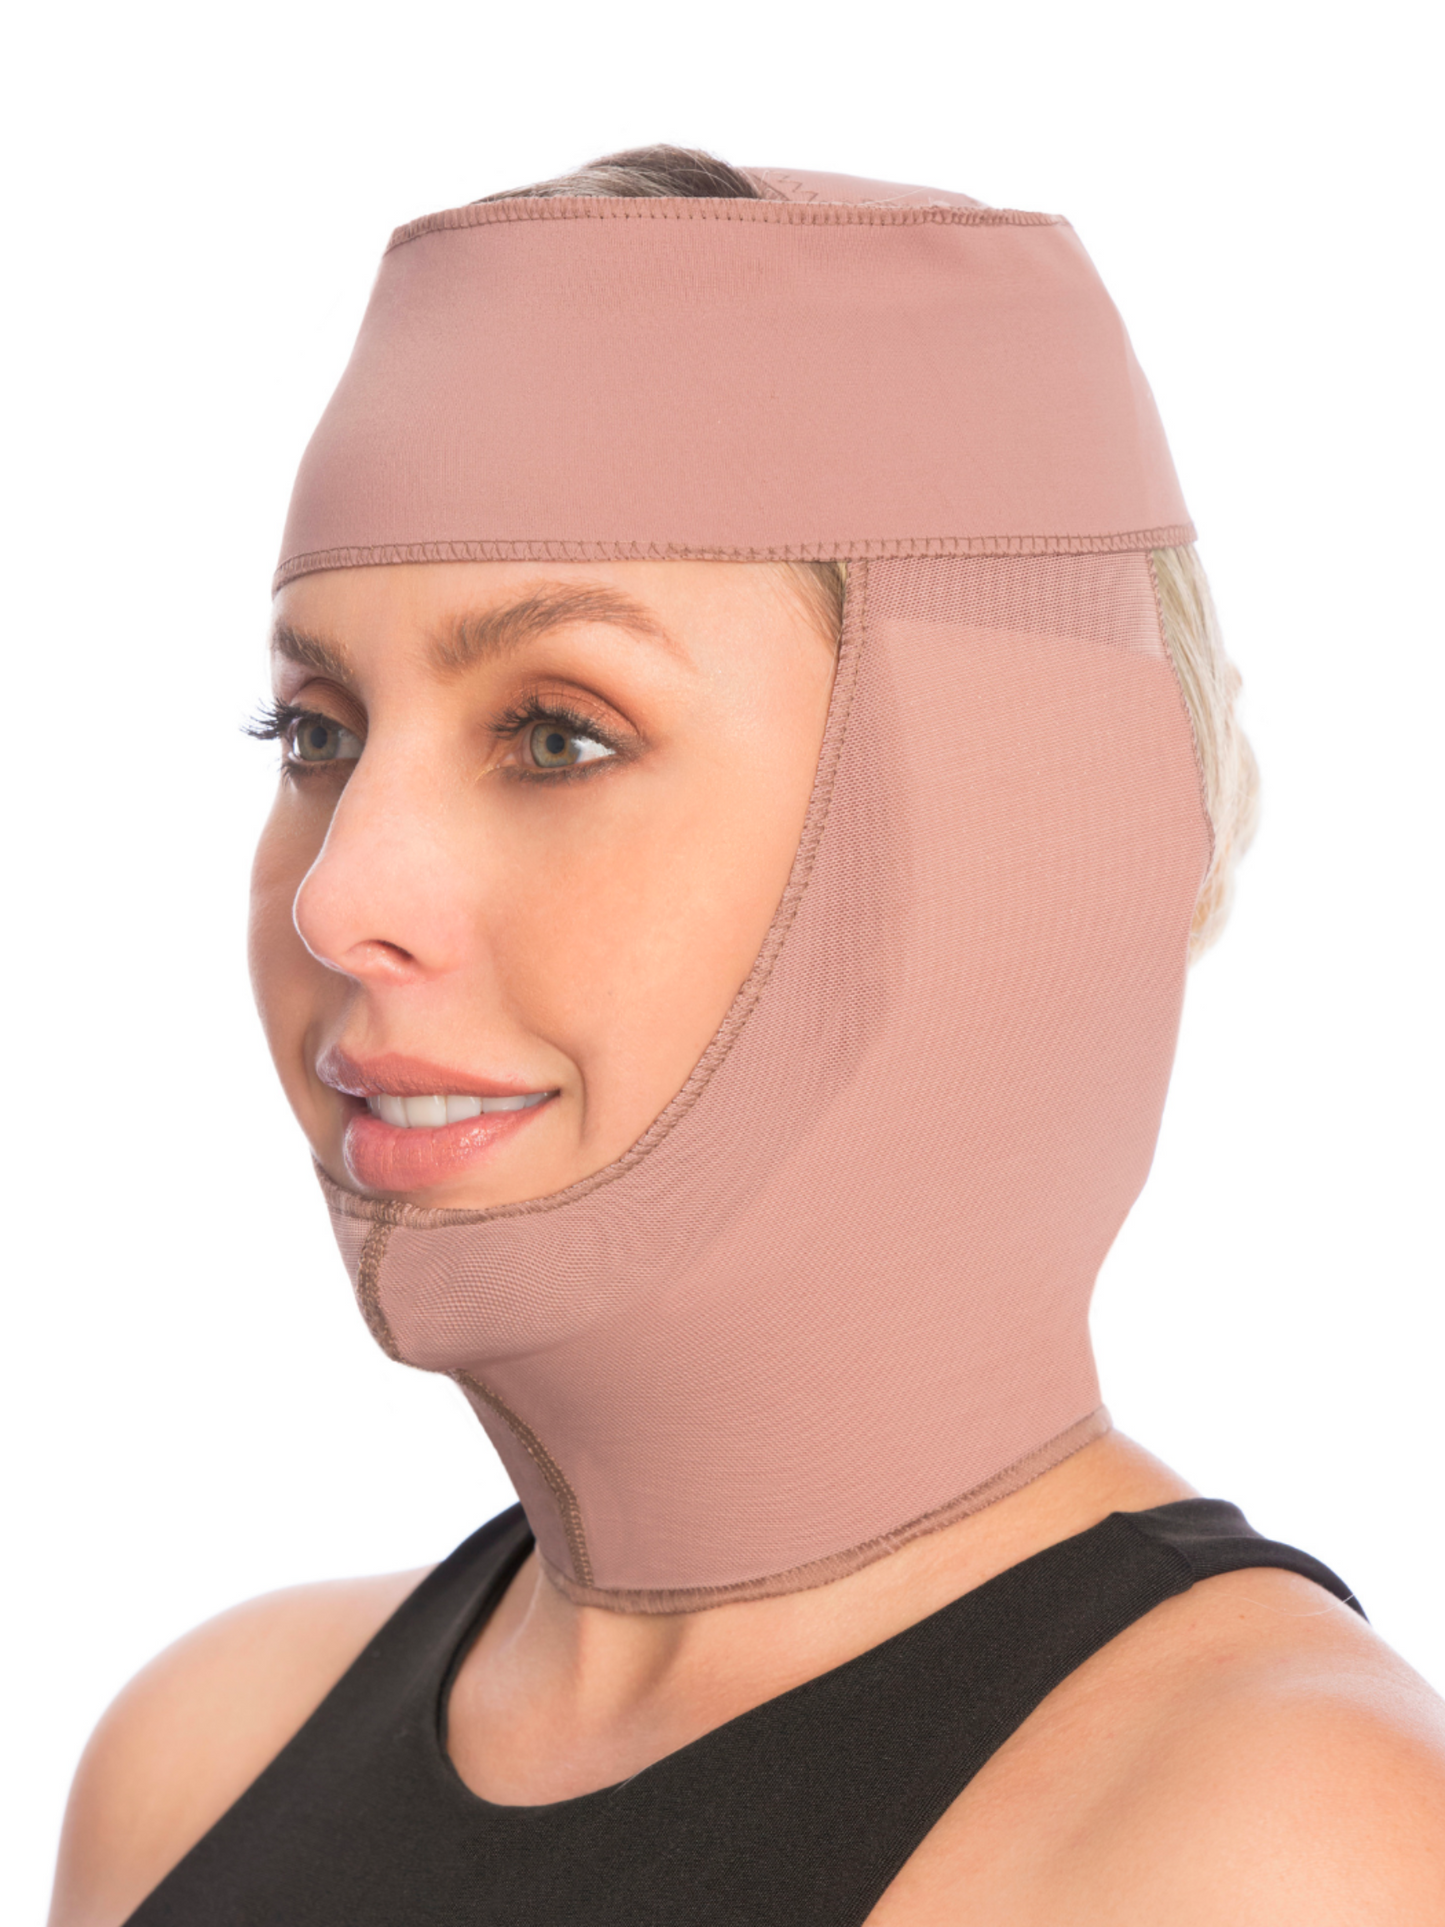 Post-Surgical Girdle for Chin, Neck and Face: Ref: 09029